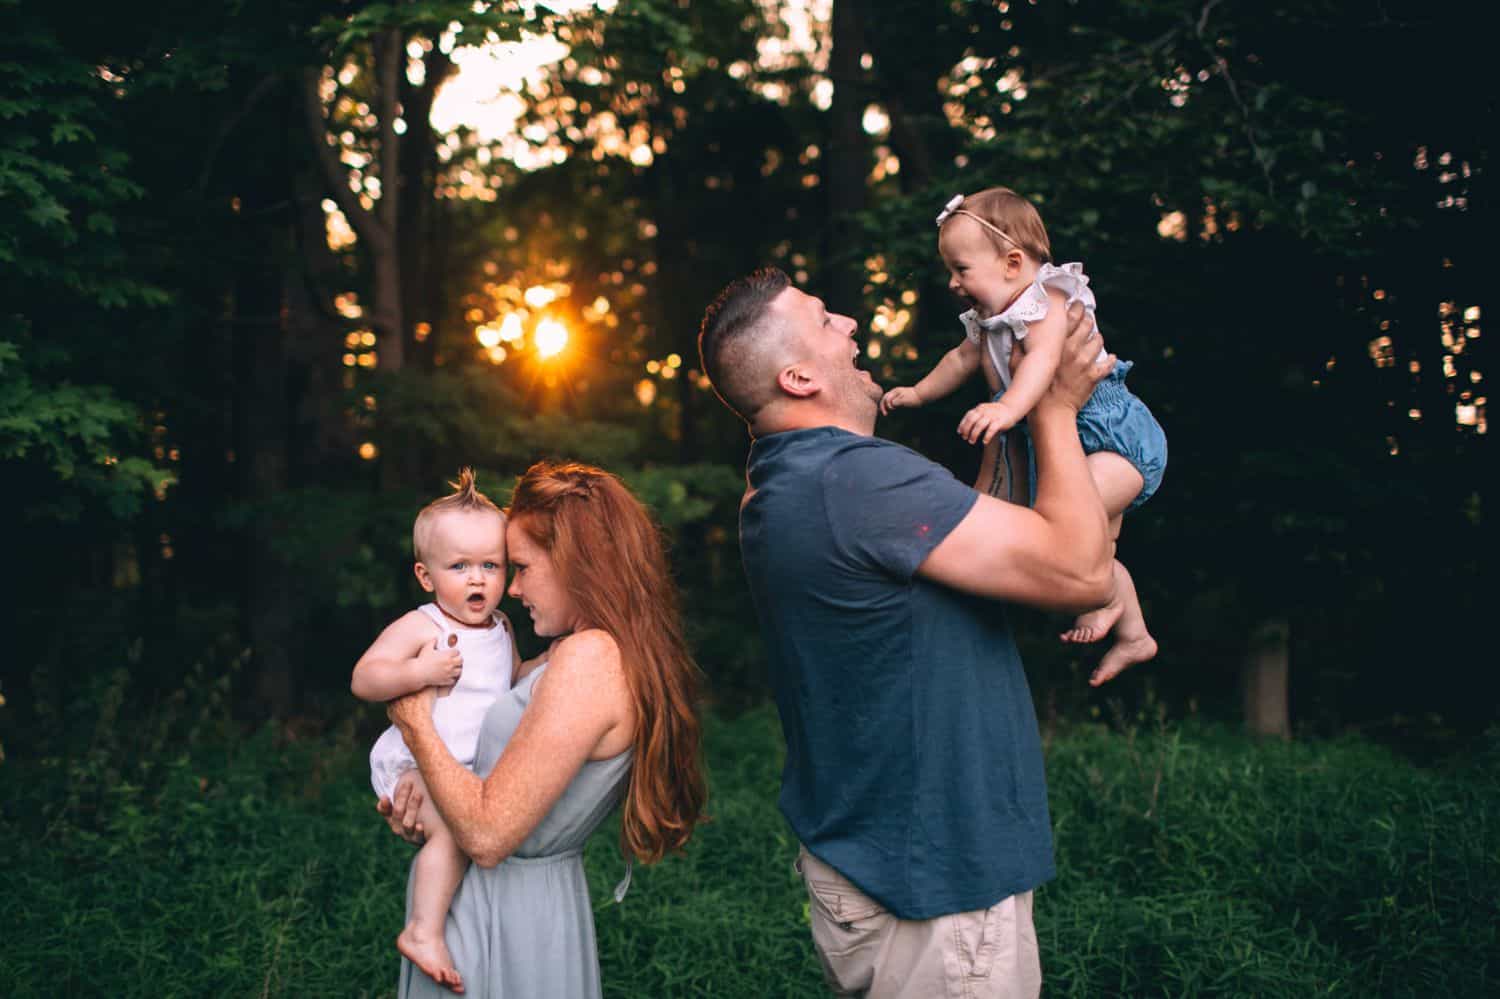 Two parents stand back-to-back at sunset, each holding one of their toddler children against a forest backdrop.